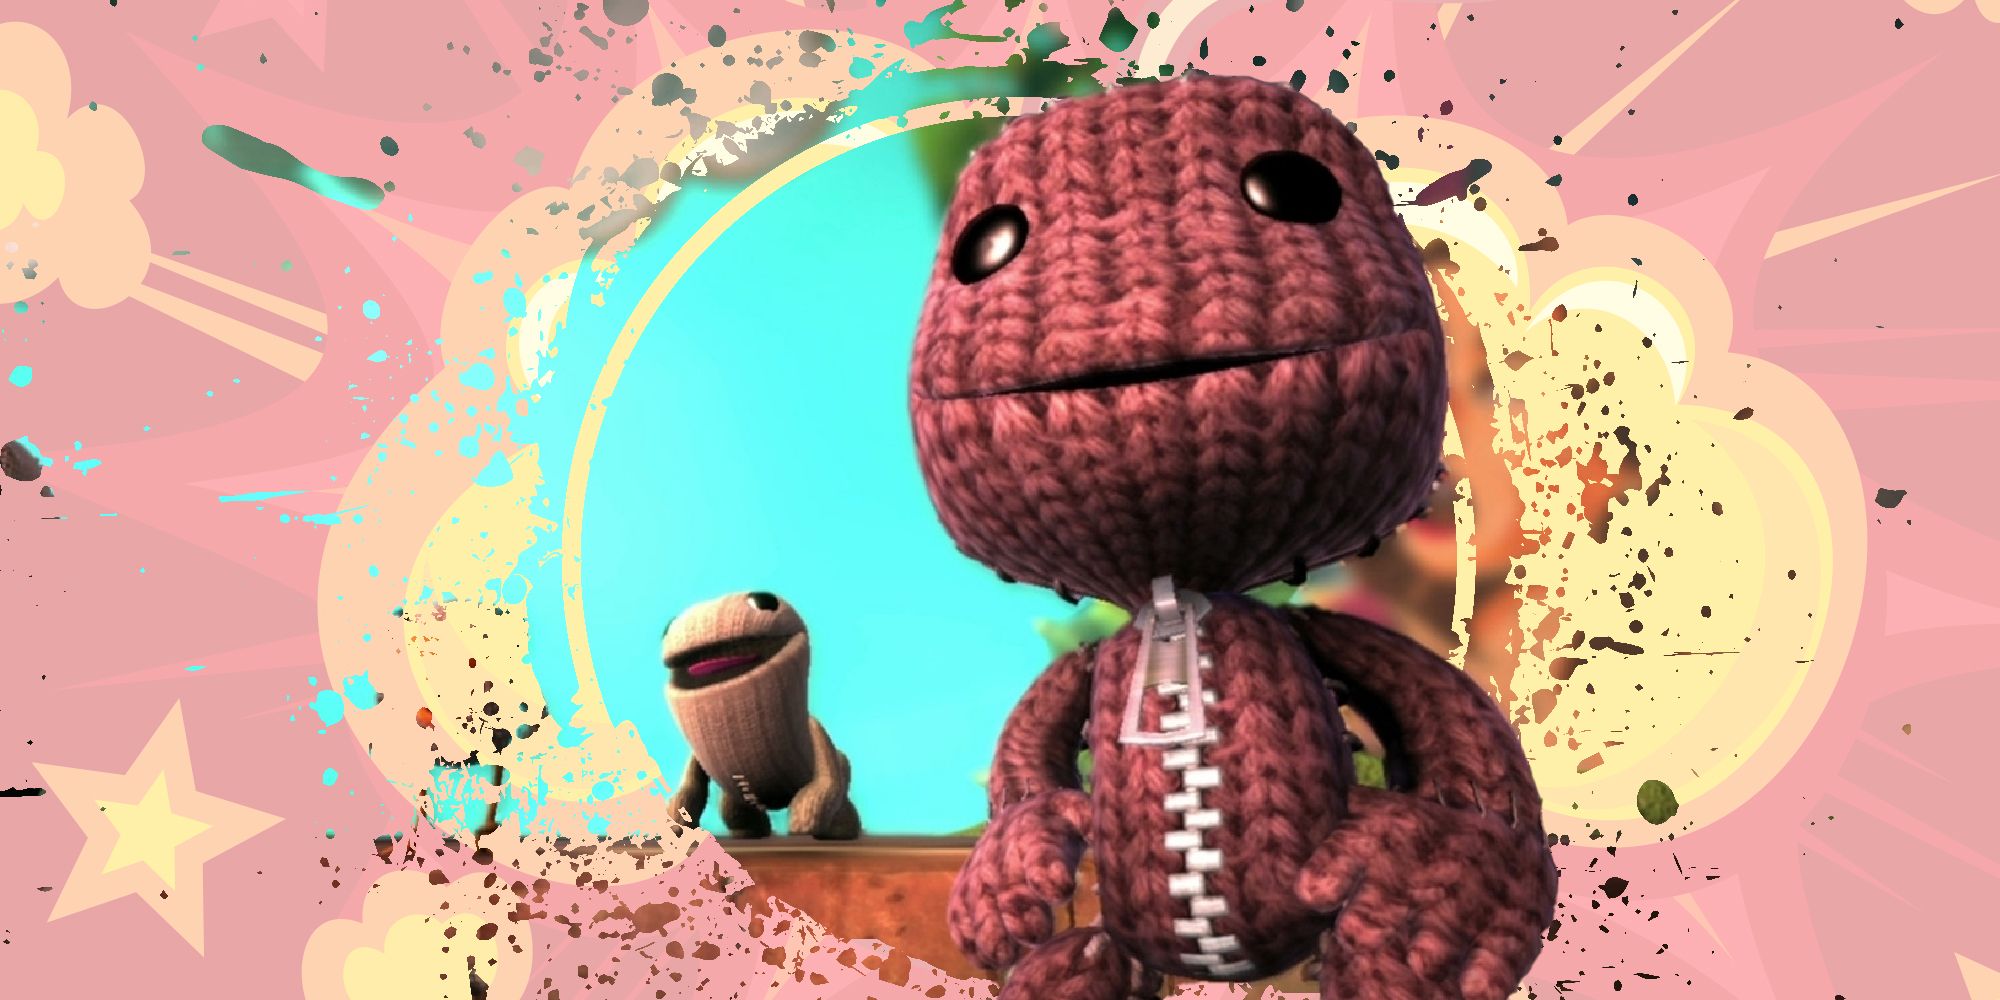 Nothing Made Me Feel As Alive As LittleBigPlanet's Bomb Survival